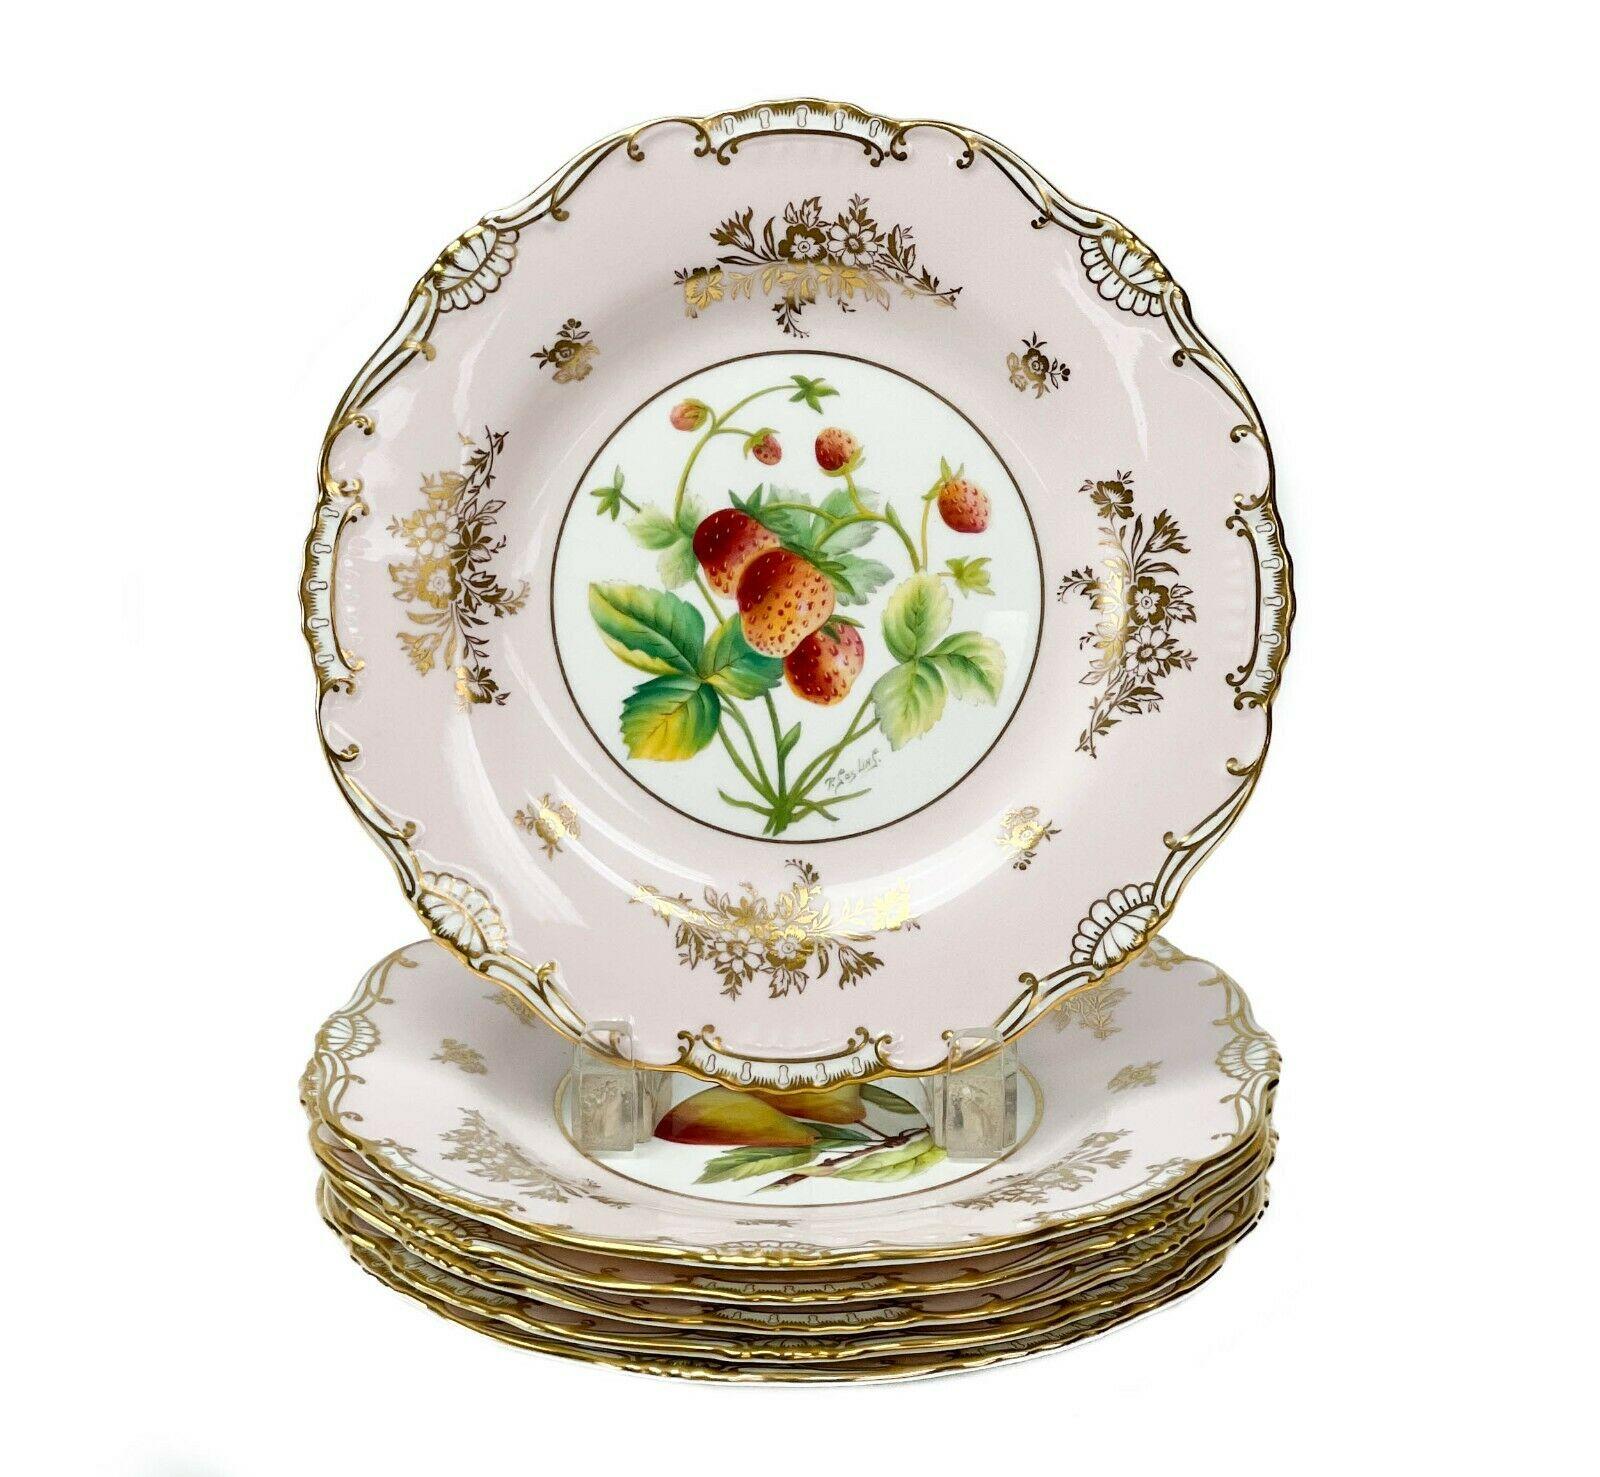 6 Minton Hand Painted Porcelain Dessert Plates Fruit Signed c. 1950 Tiffany

6 Minton England hand painted porcelain dessert plates, circa 1950. A pink ground with various hand painted images of fruit to the center. Gilt floral decoration to the